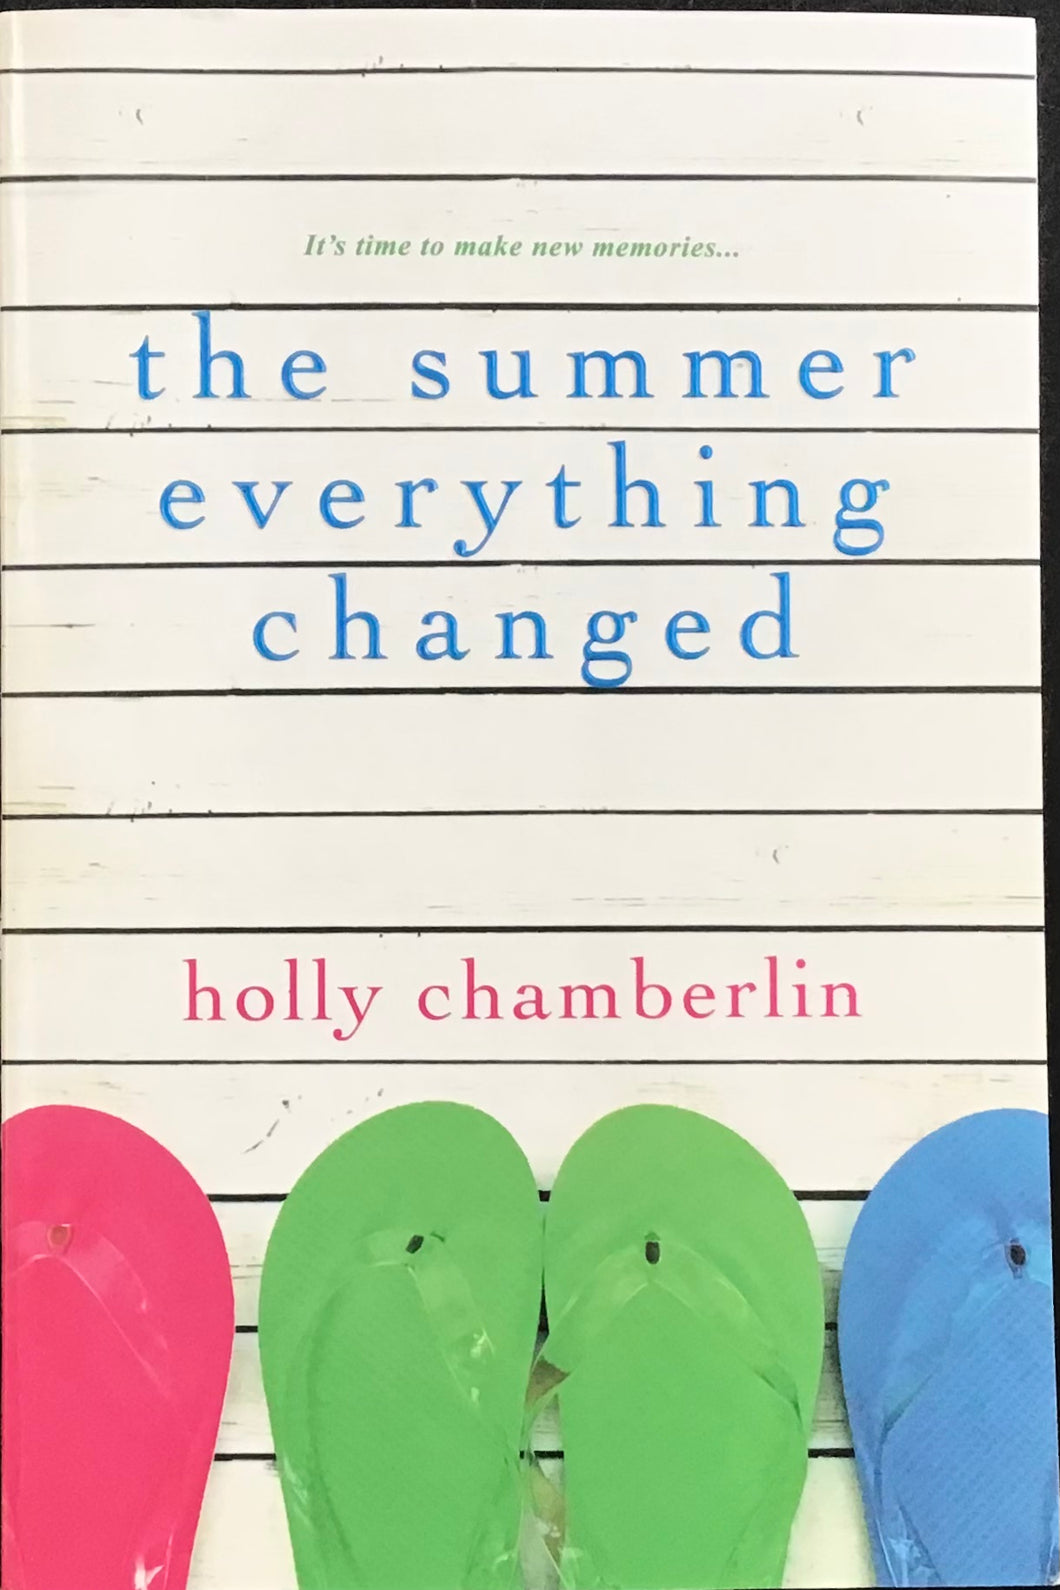 The Summer everything changed, Holly Chamberlin